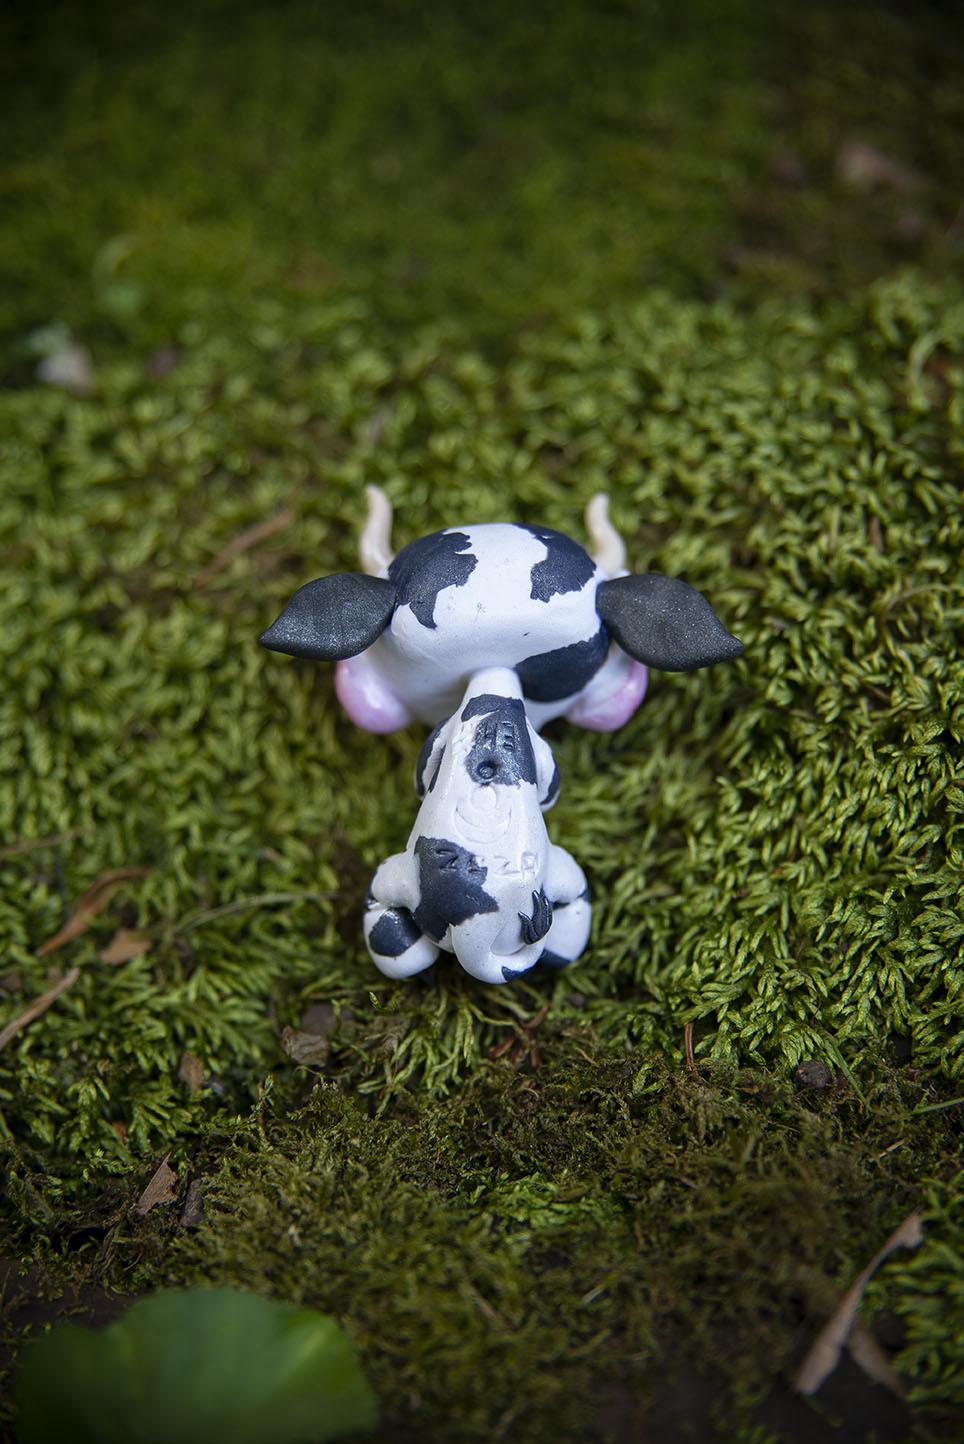 Cow "Abby Abduction" Mishling #43